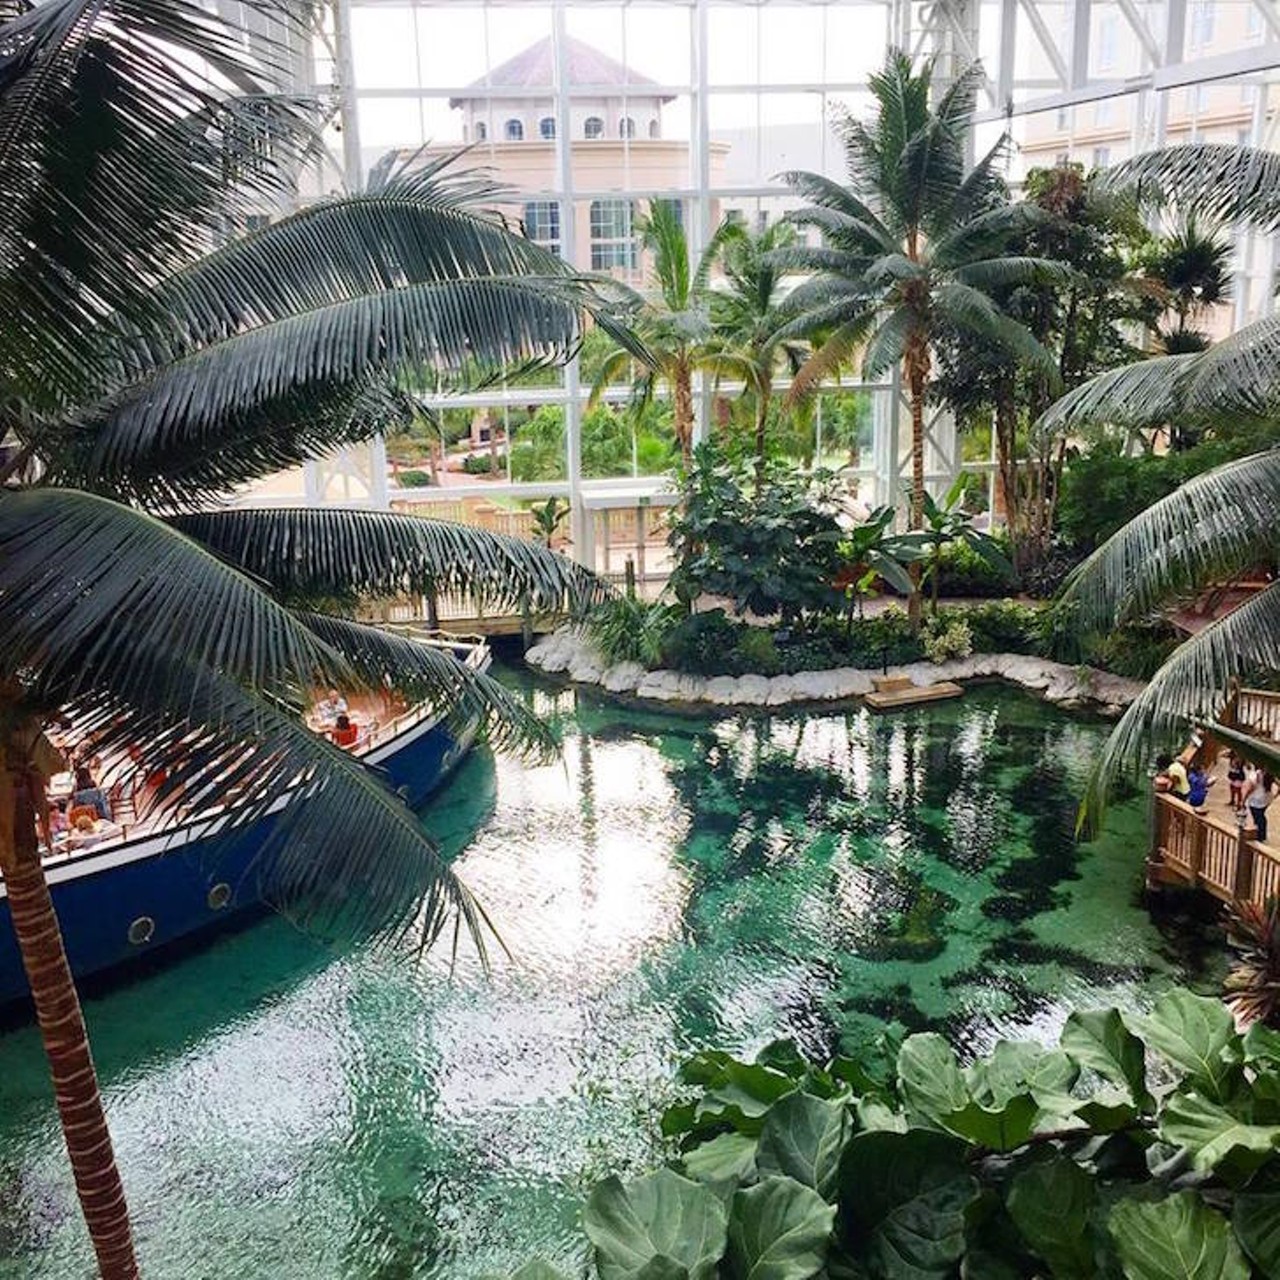 Gaylord Palms Atrium
6000 W. Osceola Parkway, Kissimmee | 407-586-0000
If you get caught under the glass atrium during a rainstorm, you won&#146;t regret a single thing. You could visit the gator exhibit, experience a slice of the Everglades in its 360,000 gallons of life-harboring waterways, or play the most epic game of hide and seek.
Photo via Belle de Couture/Facebook